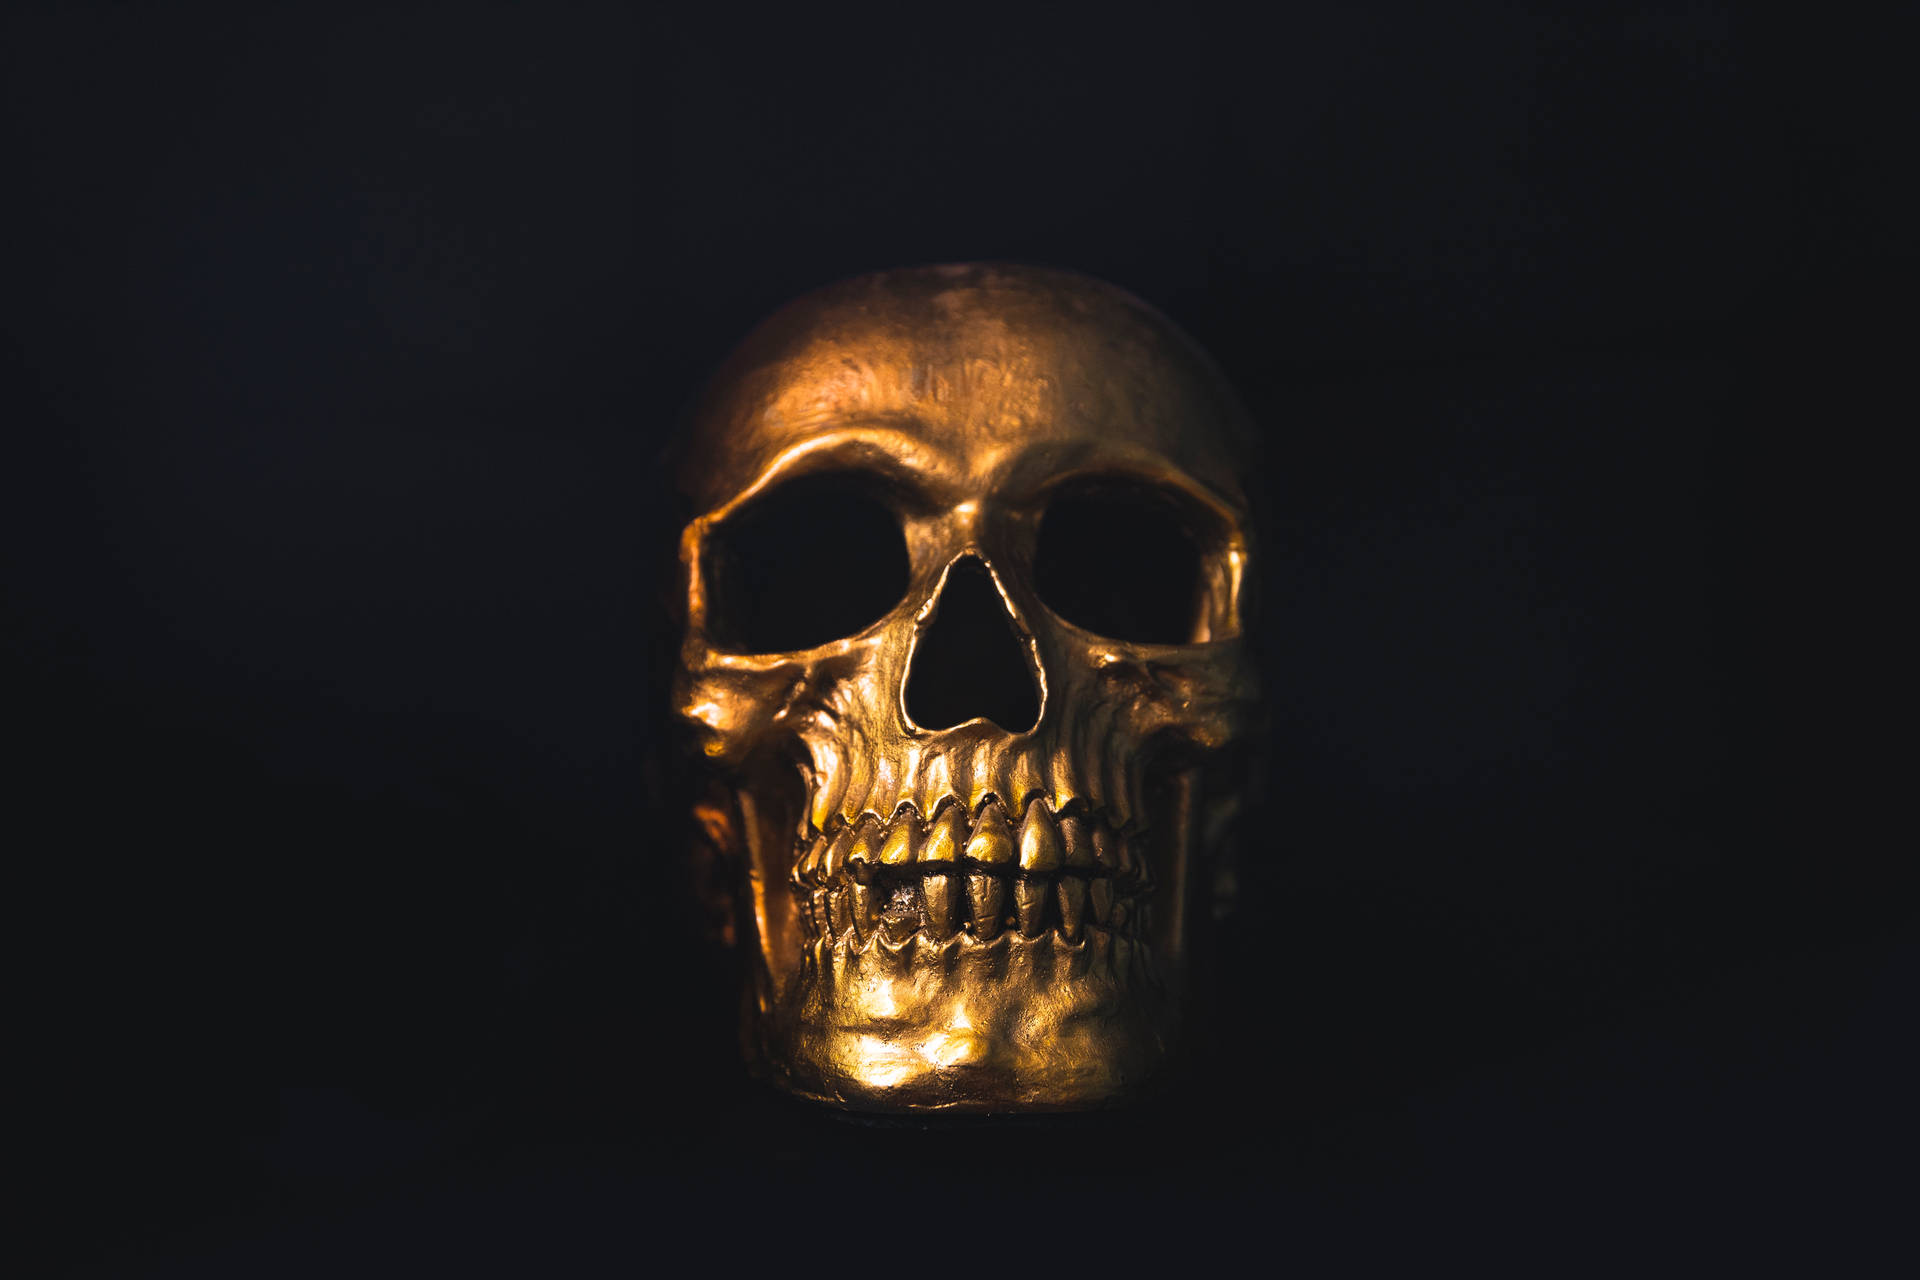 Paranormal Spooky Gold Skull Decor Background